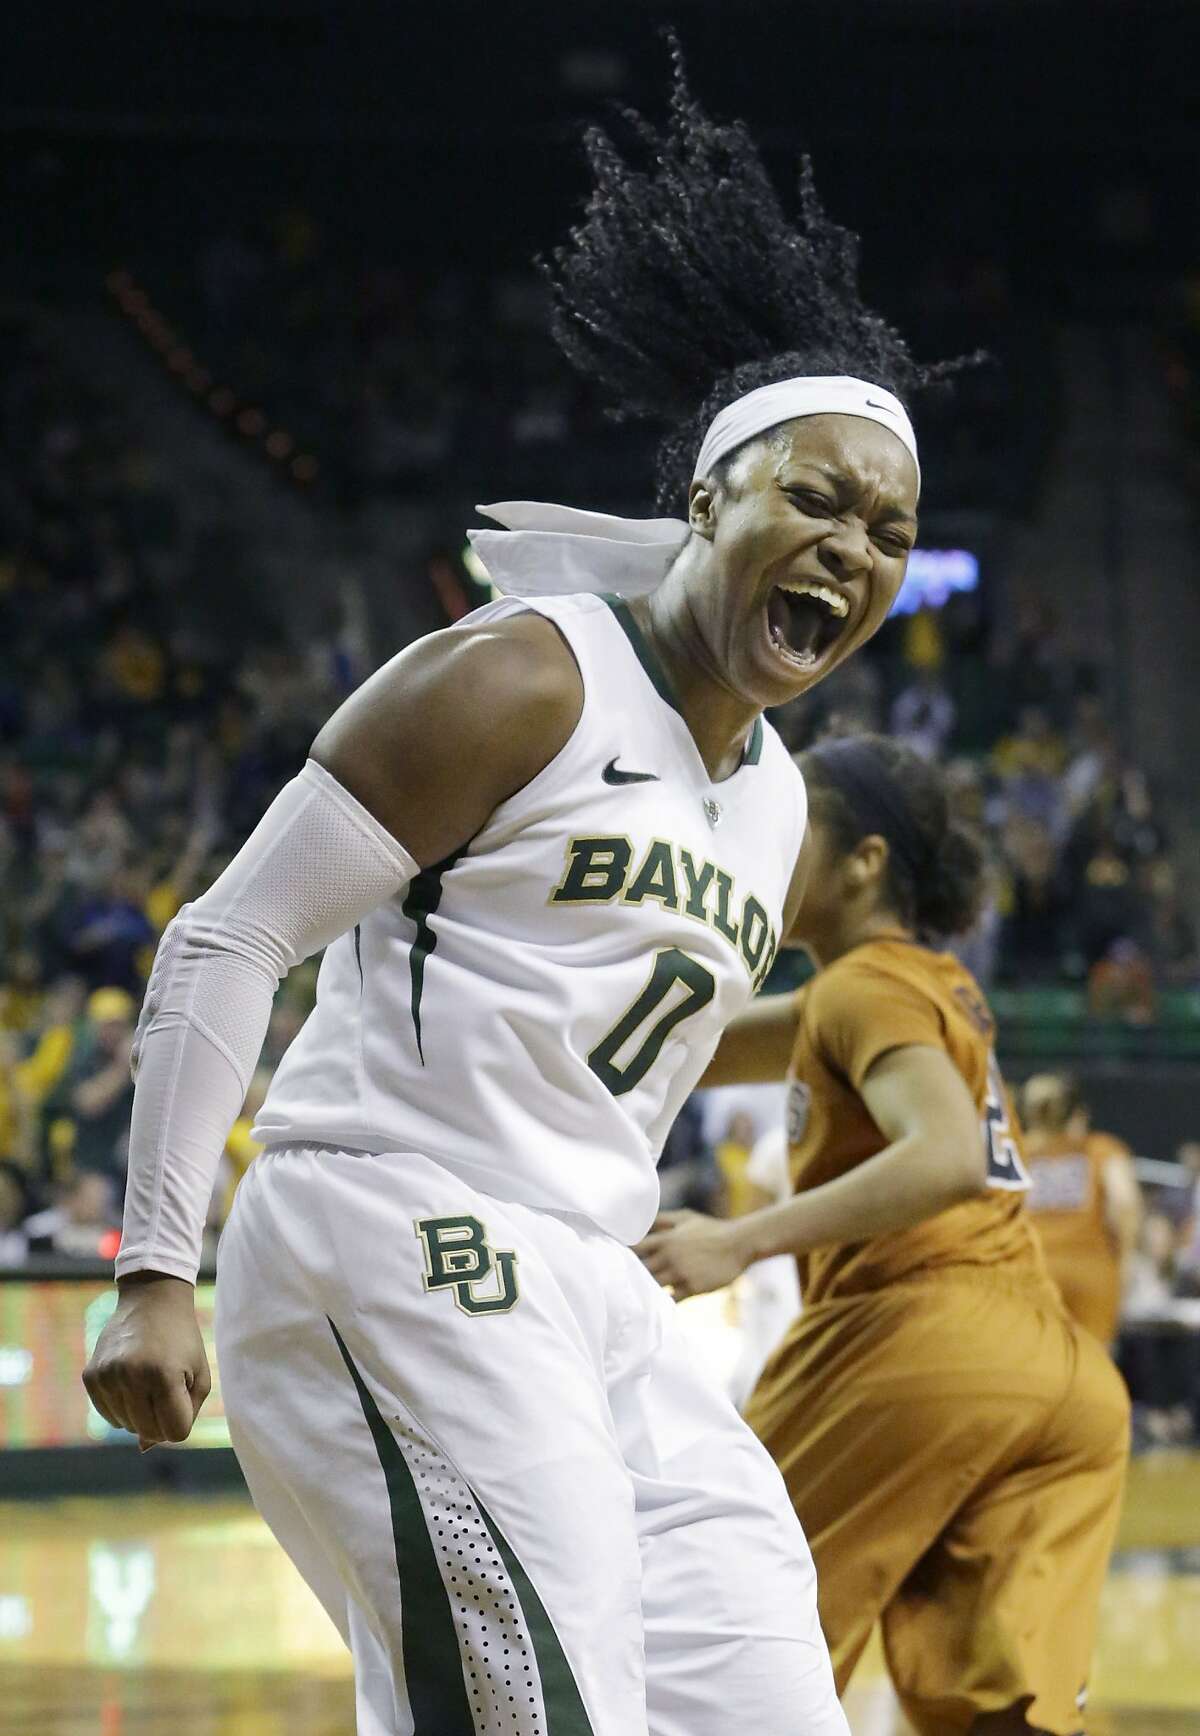 Baylor guard Odyssey Sims (0) reacts to scoring during the second half of an NCAA college basketball game against Texas, Saturday, Feb. 1, 2014, in Waco, Texas. Sims scored 44 points in the Baylor 87-73 win.